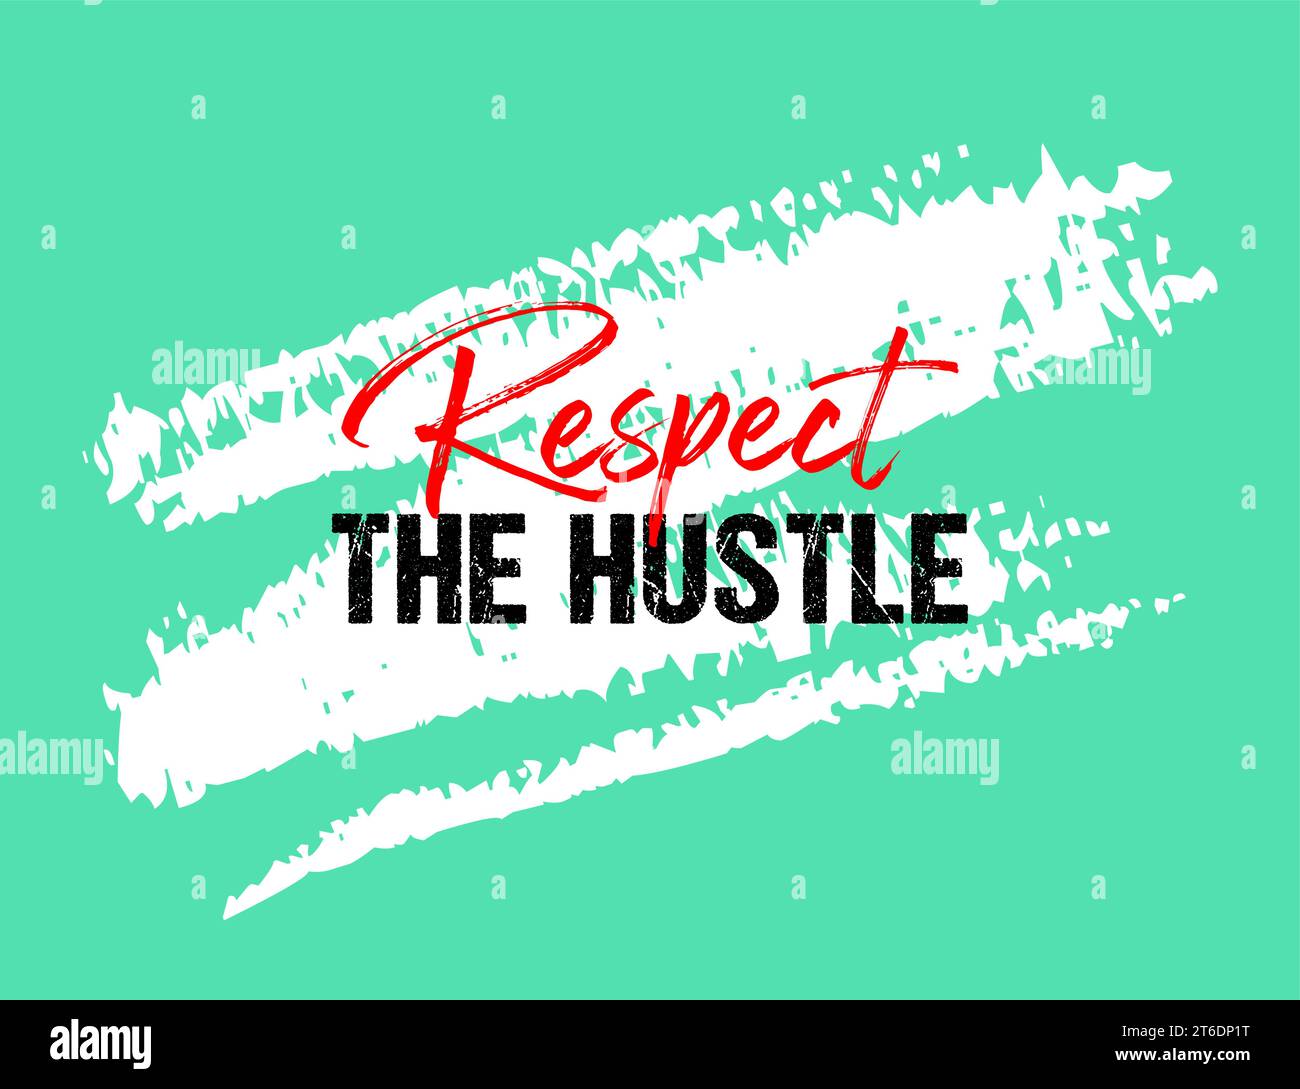 Respect the hustle motivational quote grunge lettering, slogan design, typography, brush strokes background Stock Vector